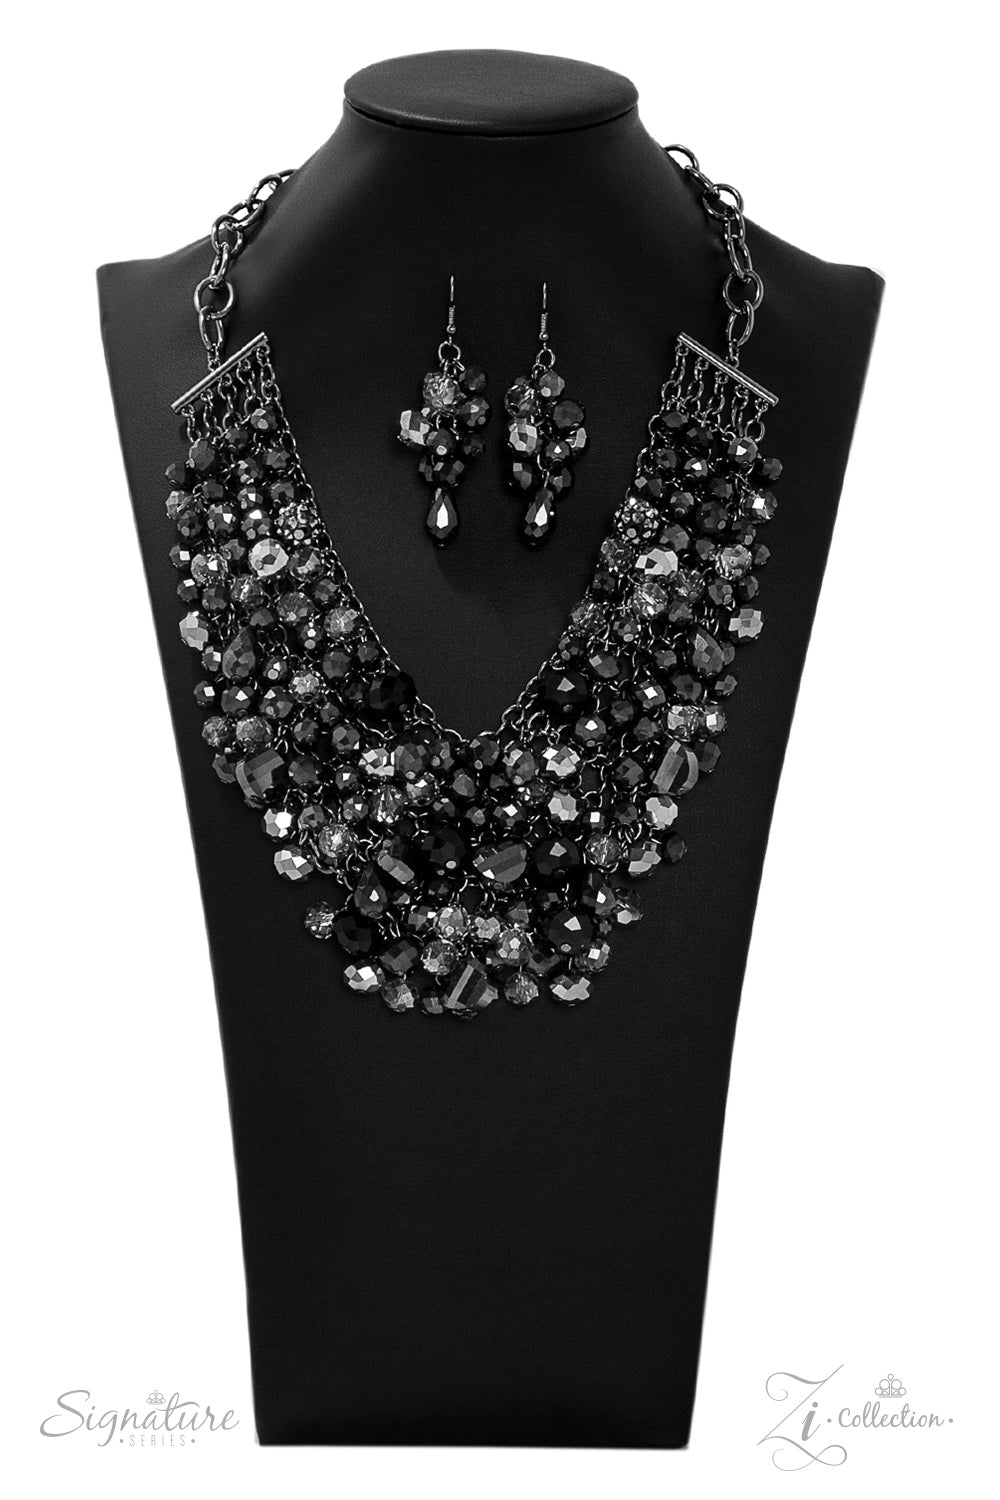 The Taylerlee Zi Collection Hematite Paparazzi Necklace Cashmere Pink Jewels - Cashmere Pink Jewels & Accessories, Cashmere Pink Jewels & Accessories - Paparazzi